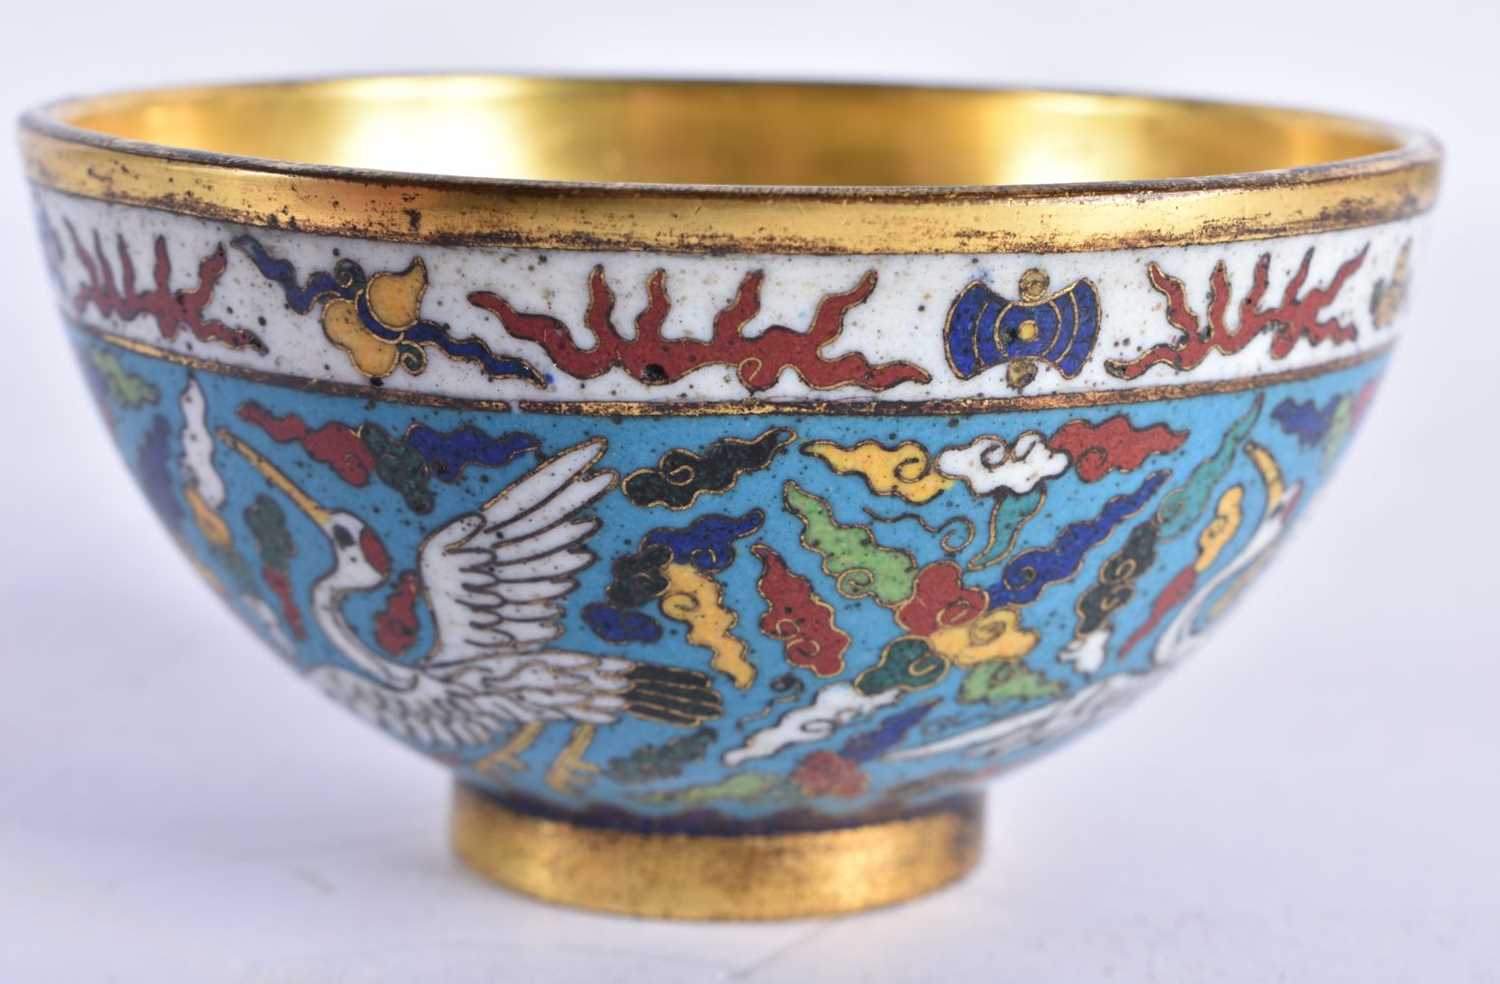 A FINE PAIR OF CLOISONNE ENAMEL BRONZE BOWLS Jiajing mark and probably of the period, decorated on a - Image 13 of 16